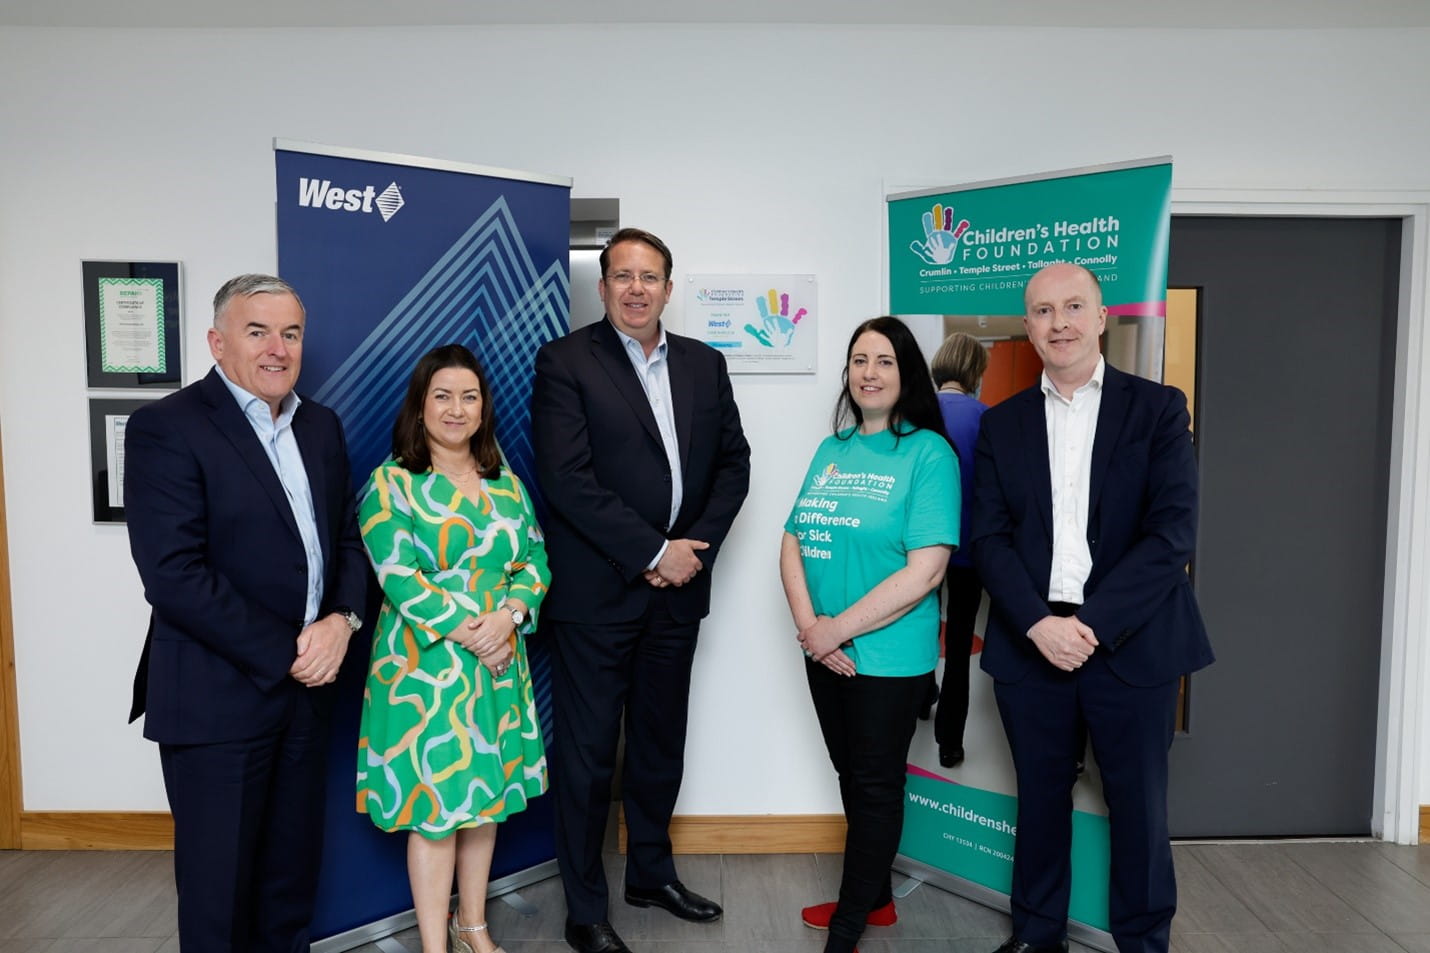 West without borders Dublin team raises €440,000 for Children’s Health Foundation Temple Street